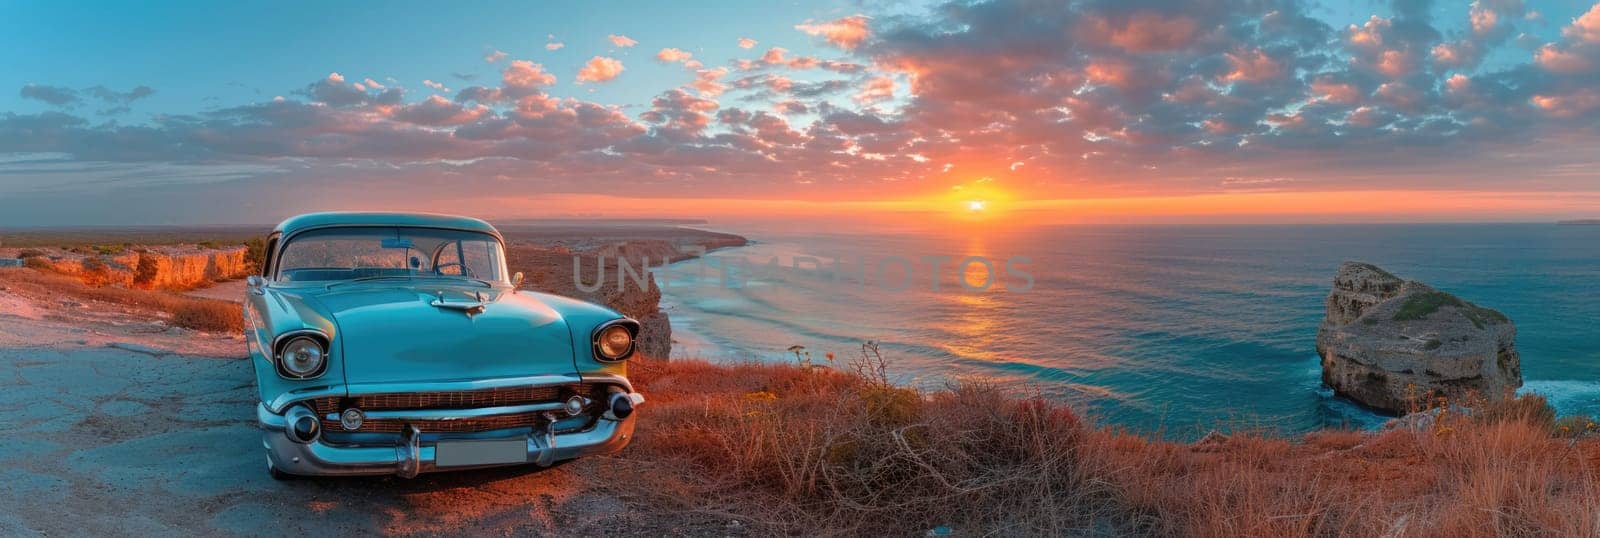 A vintage car parked on the side of a coastal road with the ocean in the background.